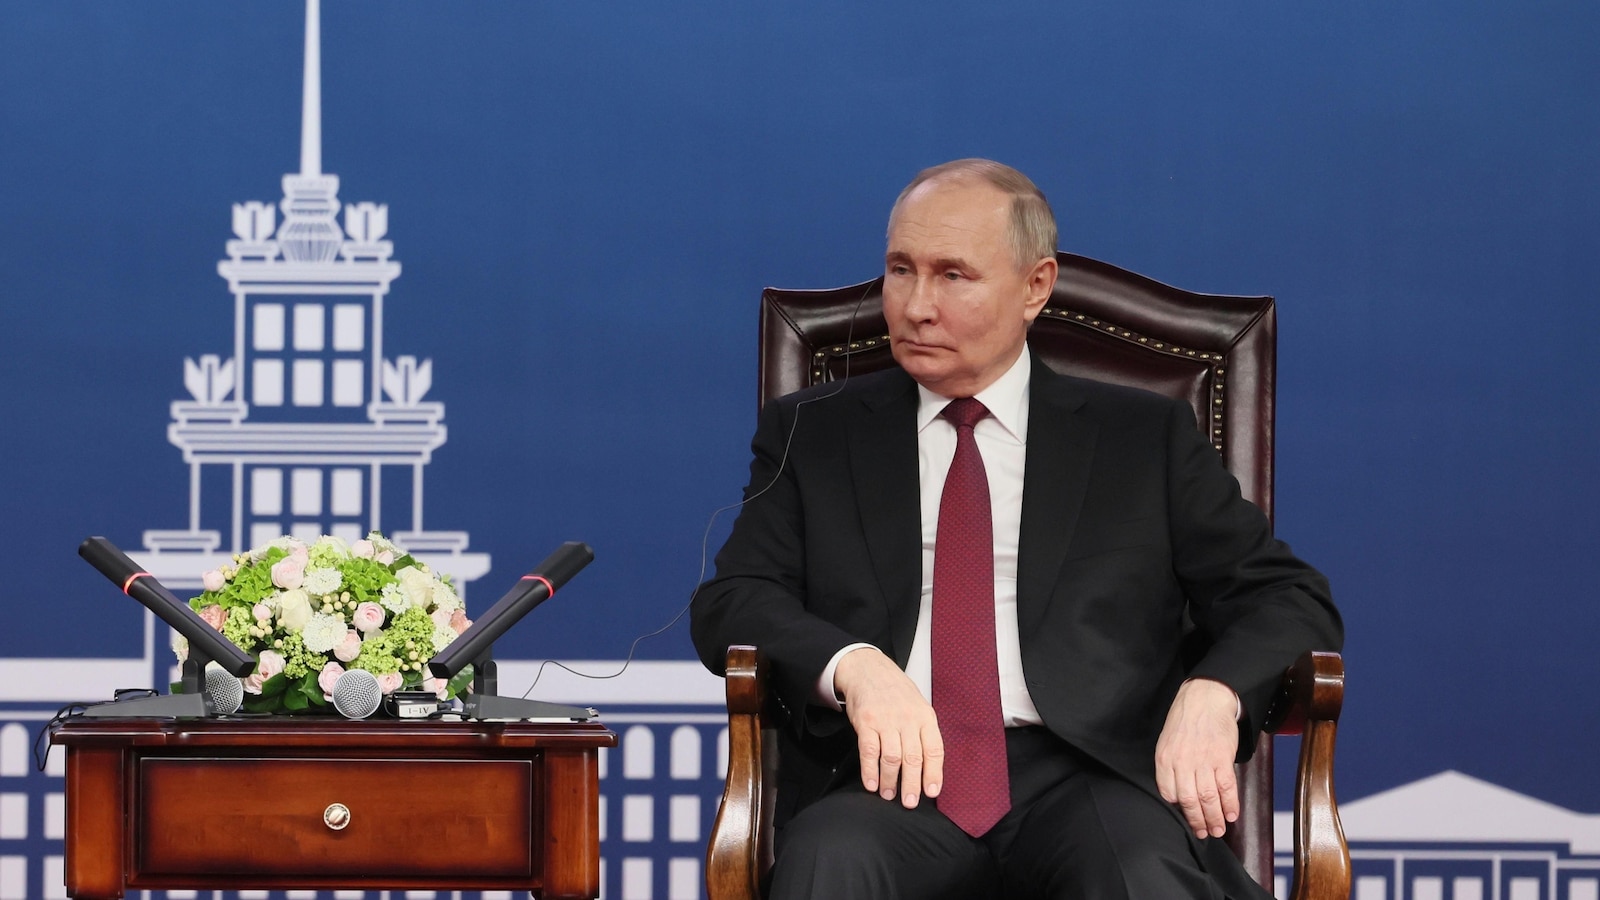 Putin concludes his trip to China by emphasizing strategic and personal ties with Russia